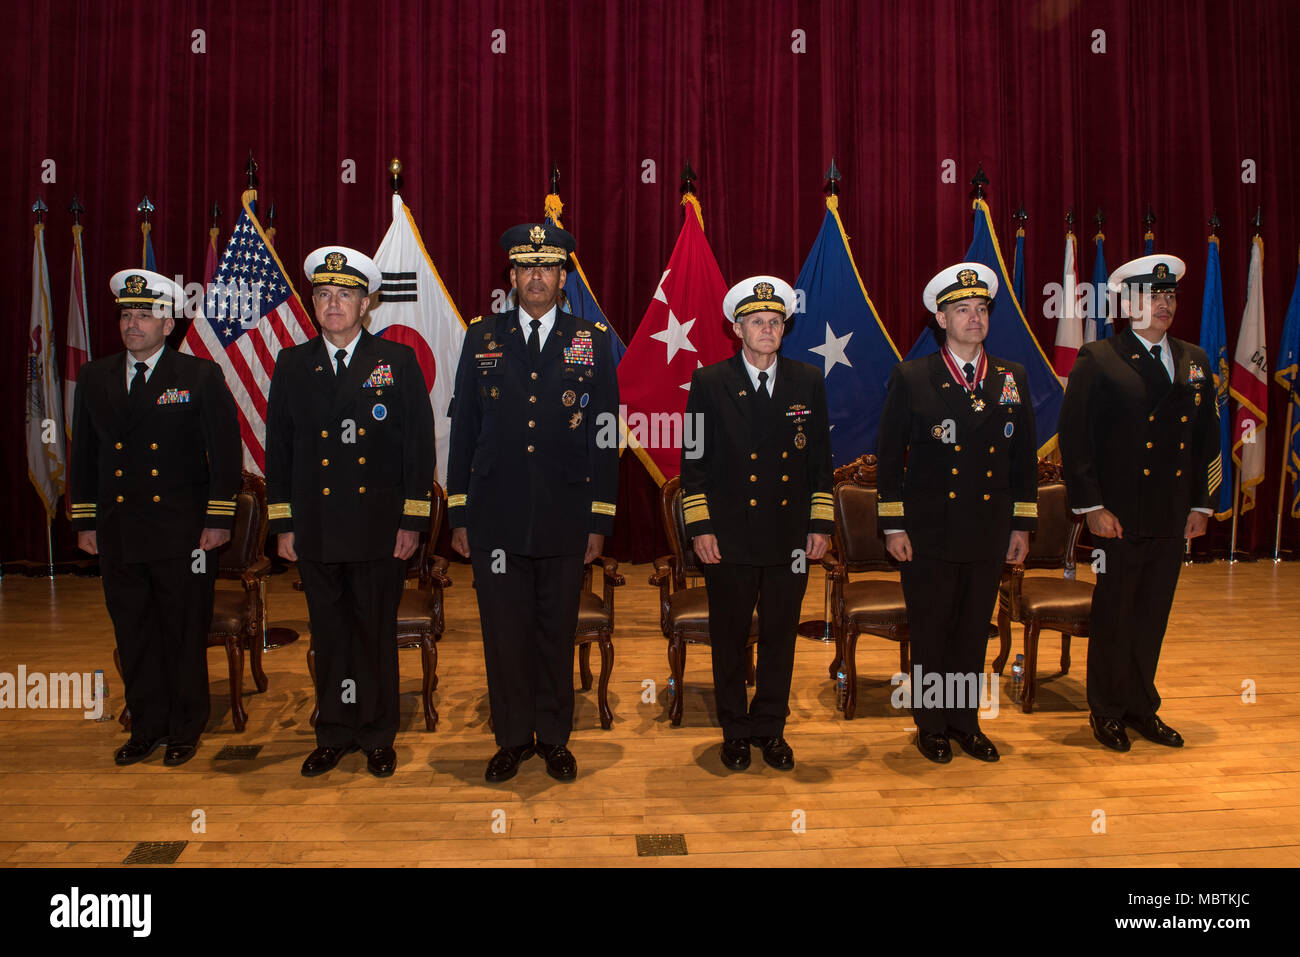 180111-N-TB148-044 Busan, Republic of Korea (Jan 11, 2018) - The official party stands at attention prior to the parading of the colors during a change of command ceremony at Commander, U.S. Naval Forces Korea headquarters. During the ceremony Rear Adm. Michael E. Boyle relieved Rear Adm. Brad Cooper, becoming CNFK’s 36th commander. (U.S. Navy photo by Mass Communication Specialist Seaman William Carlisle/ Released) Stock Photo